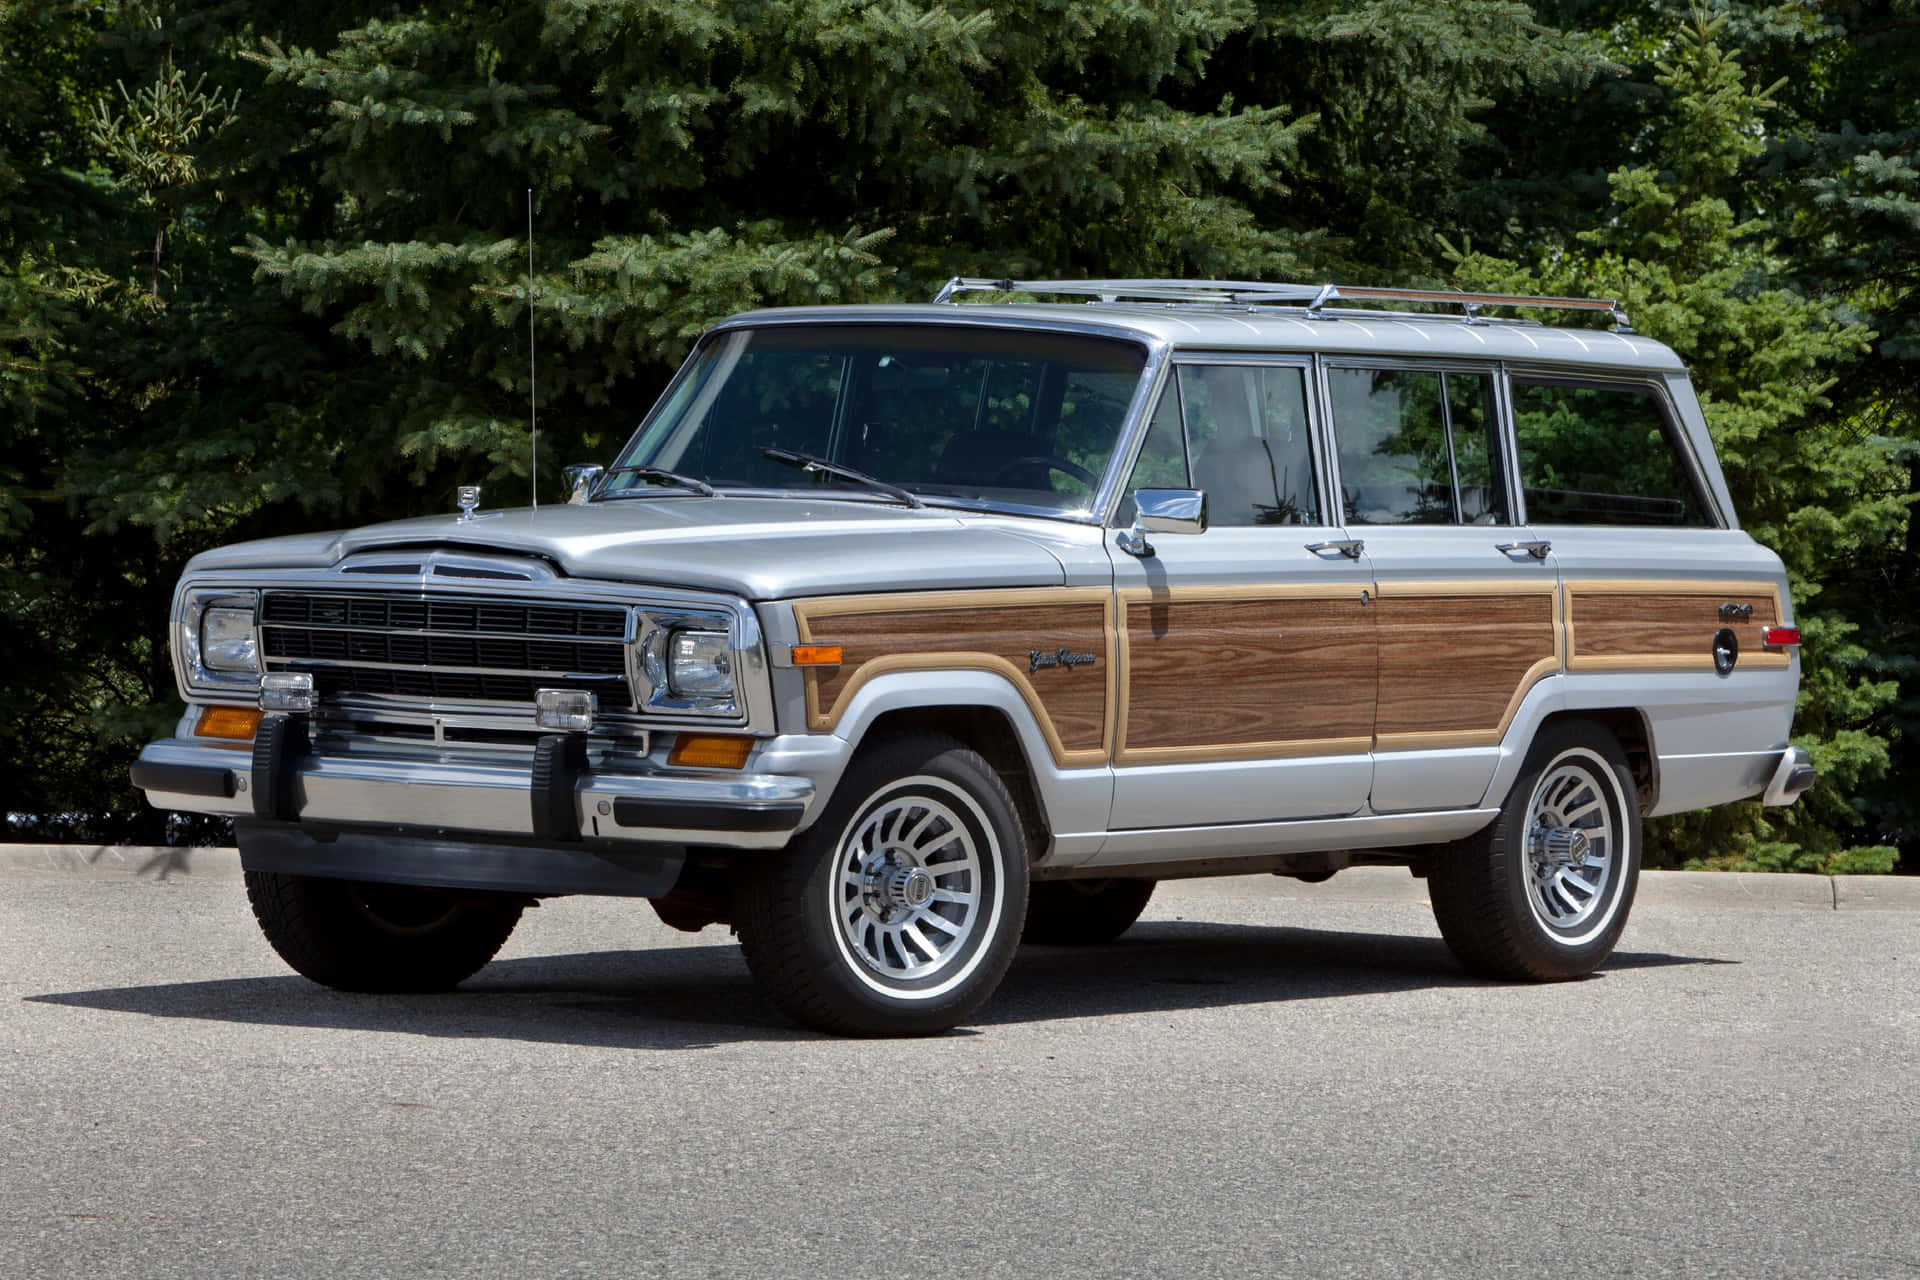 Majestic Jeep Wagoneer in Natural Setting Wallpaper